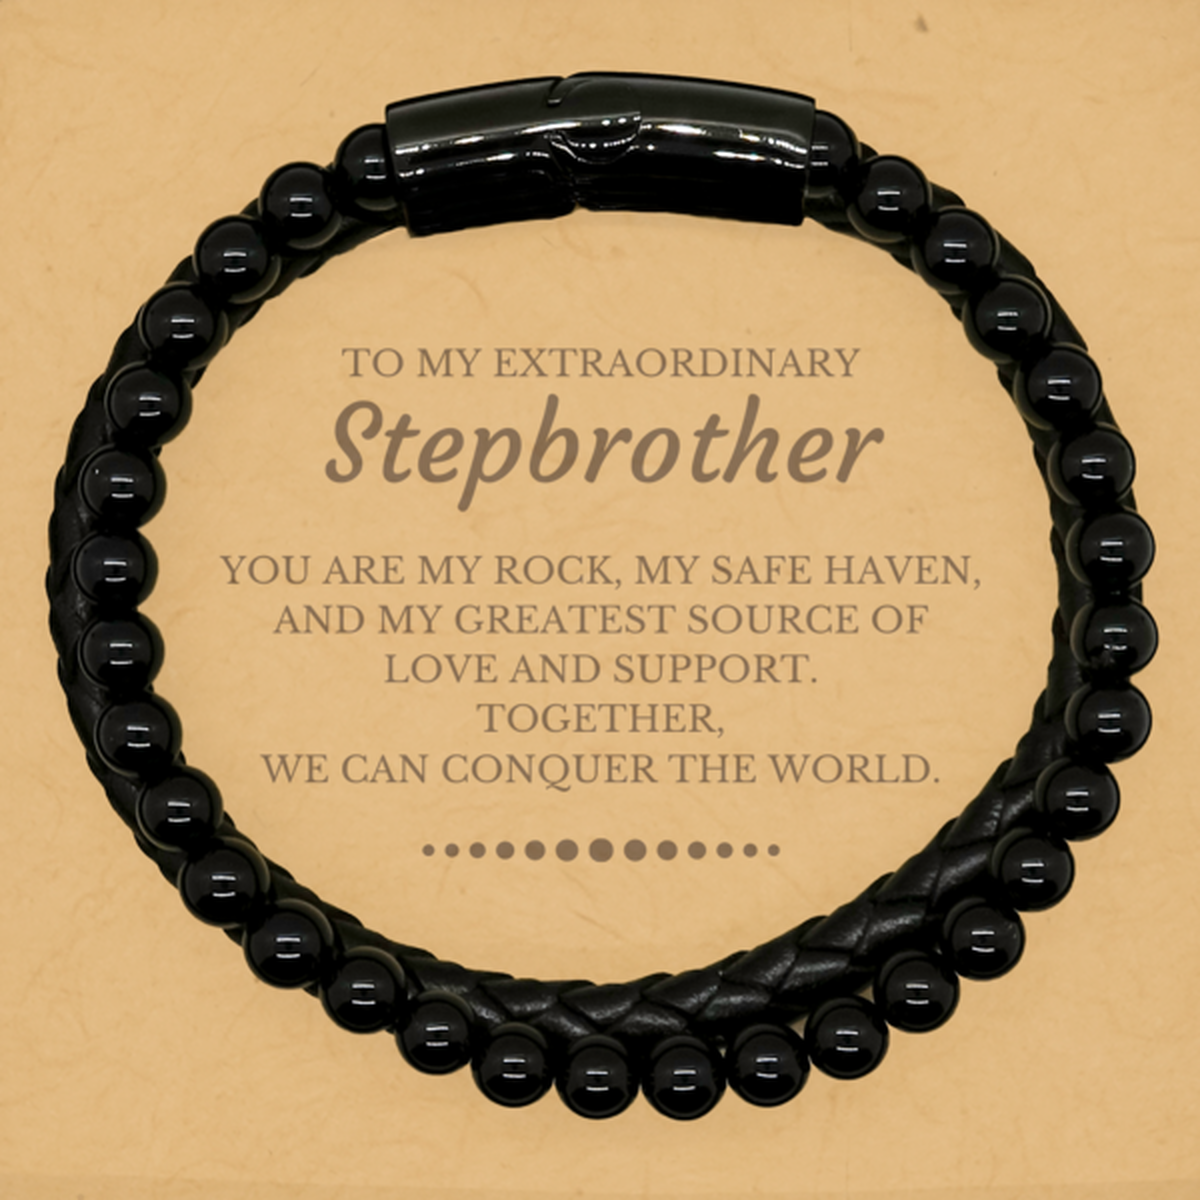 To My Extraordinary Stepbrother Gifts, Together, we can conquer the world, Birthday Stone Leather Bracelets For Stepbrother, Christmas Gifts For Stepbrother